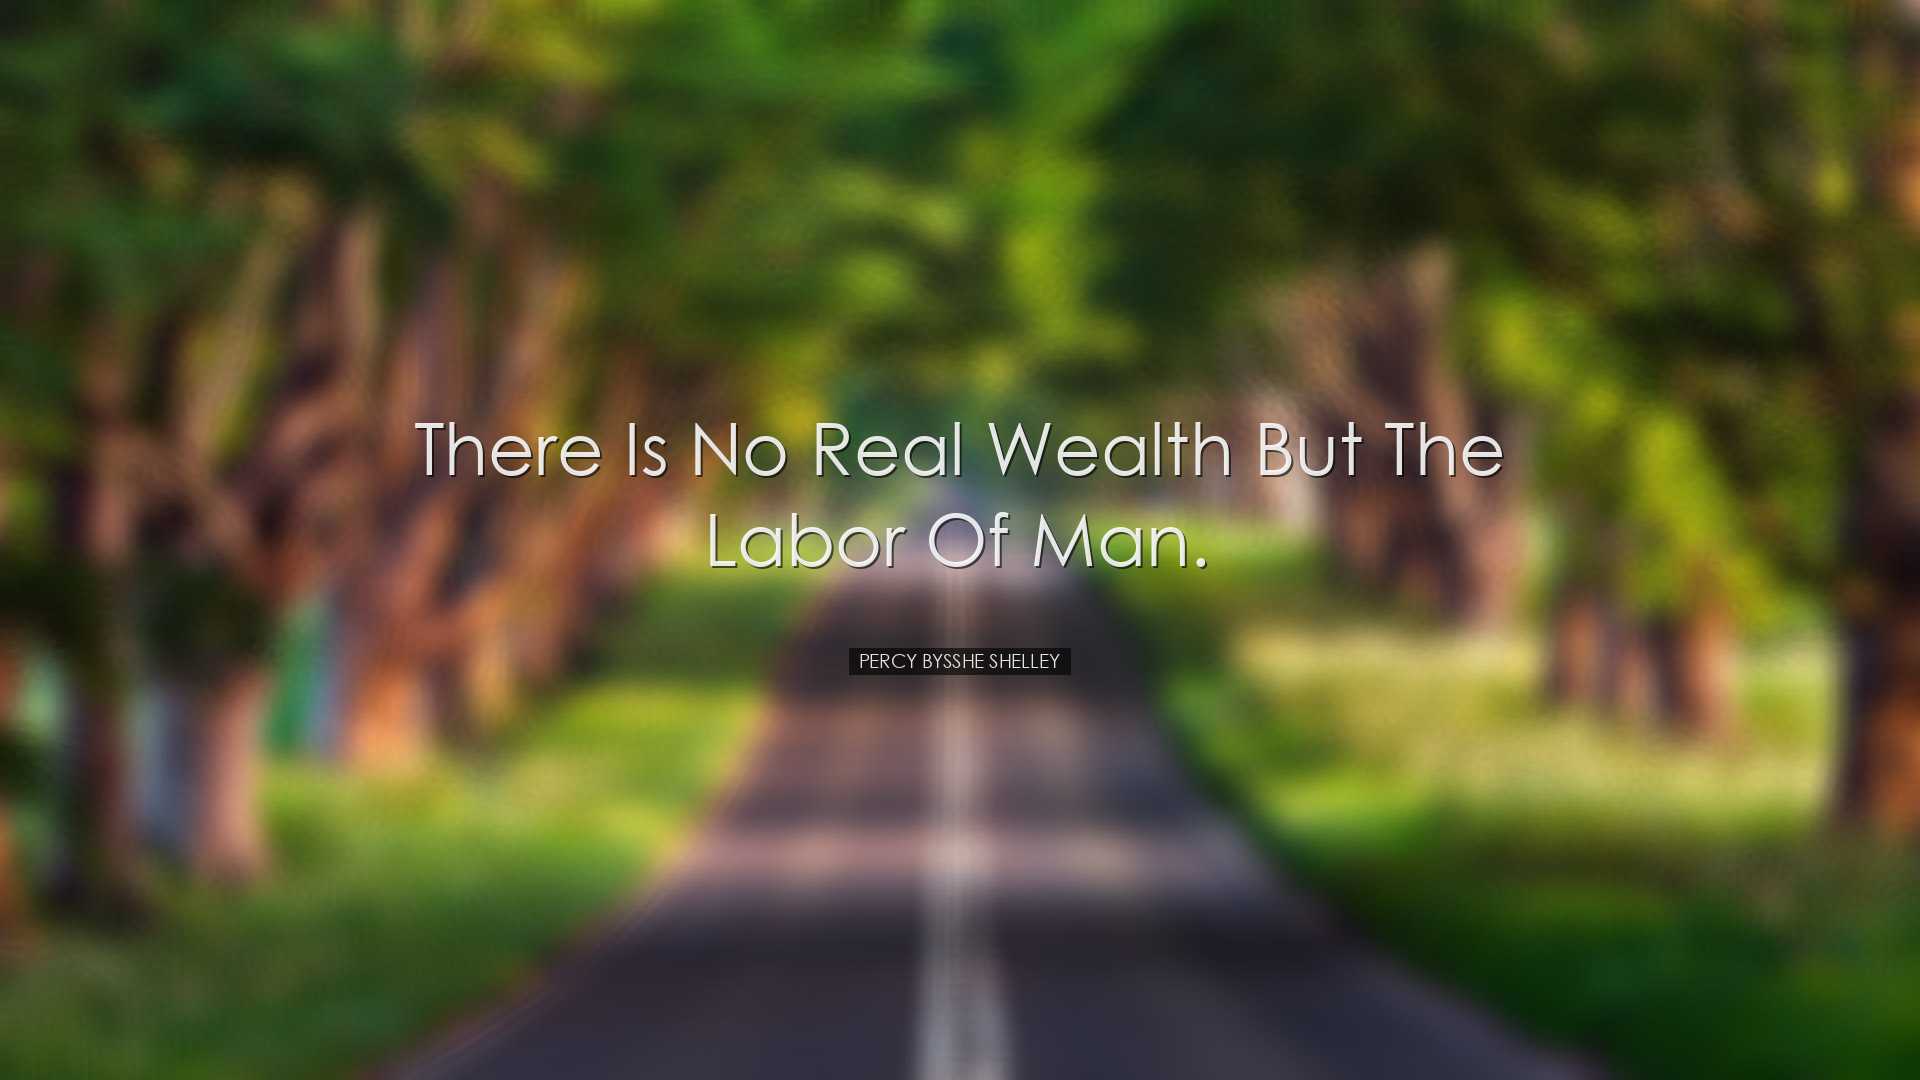 There is no real wealth but the labor of man. - Percy Bysshe Shell